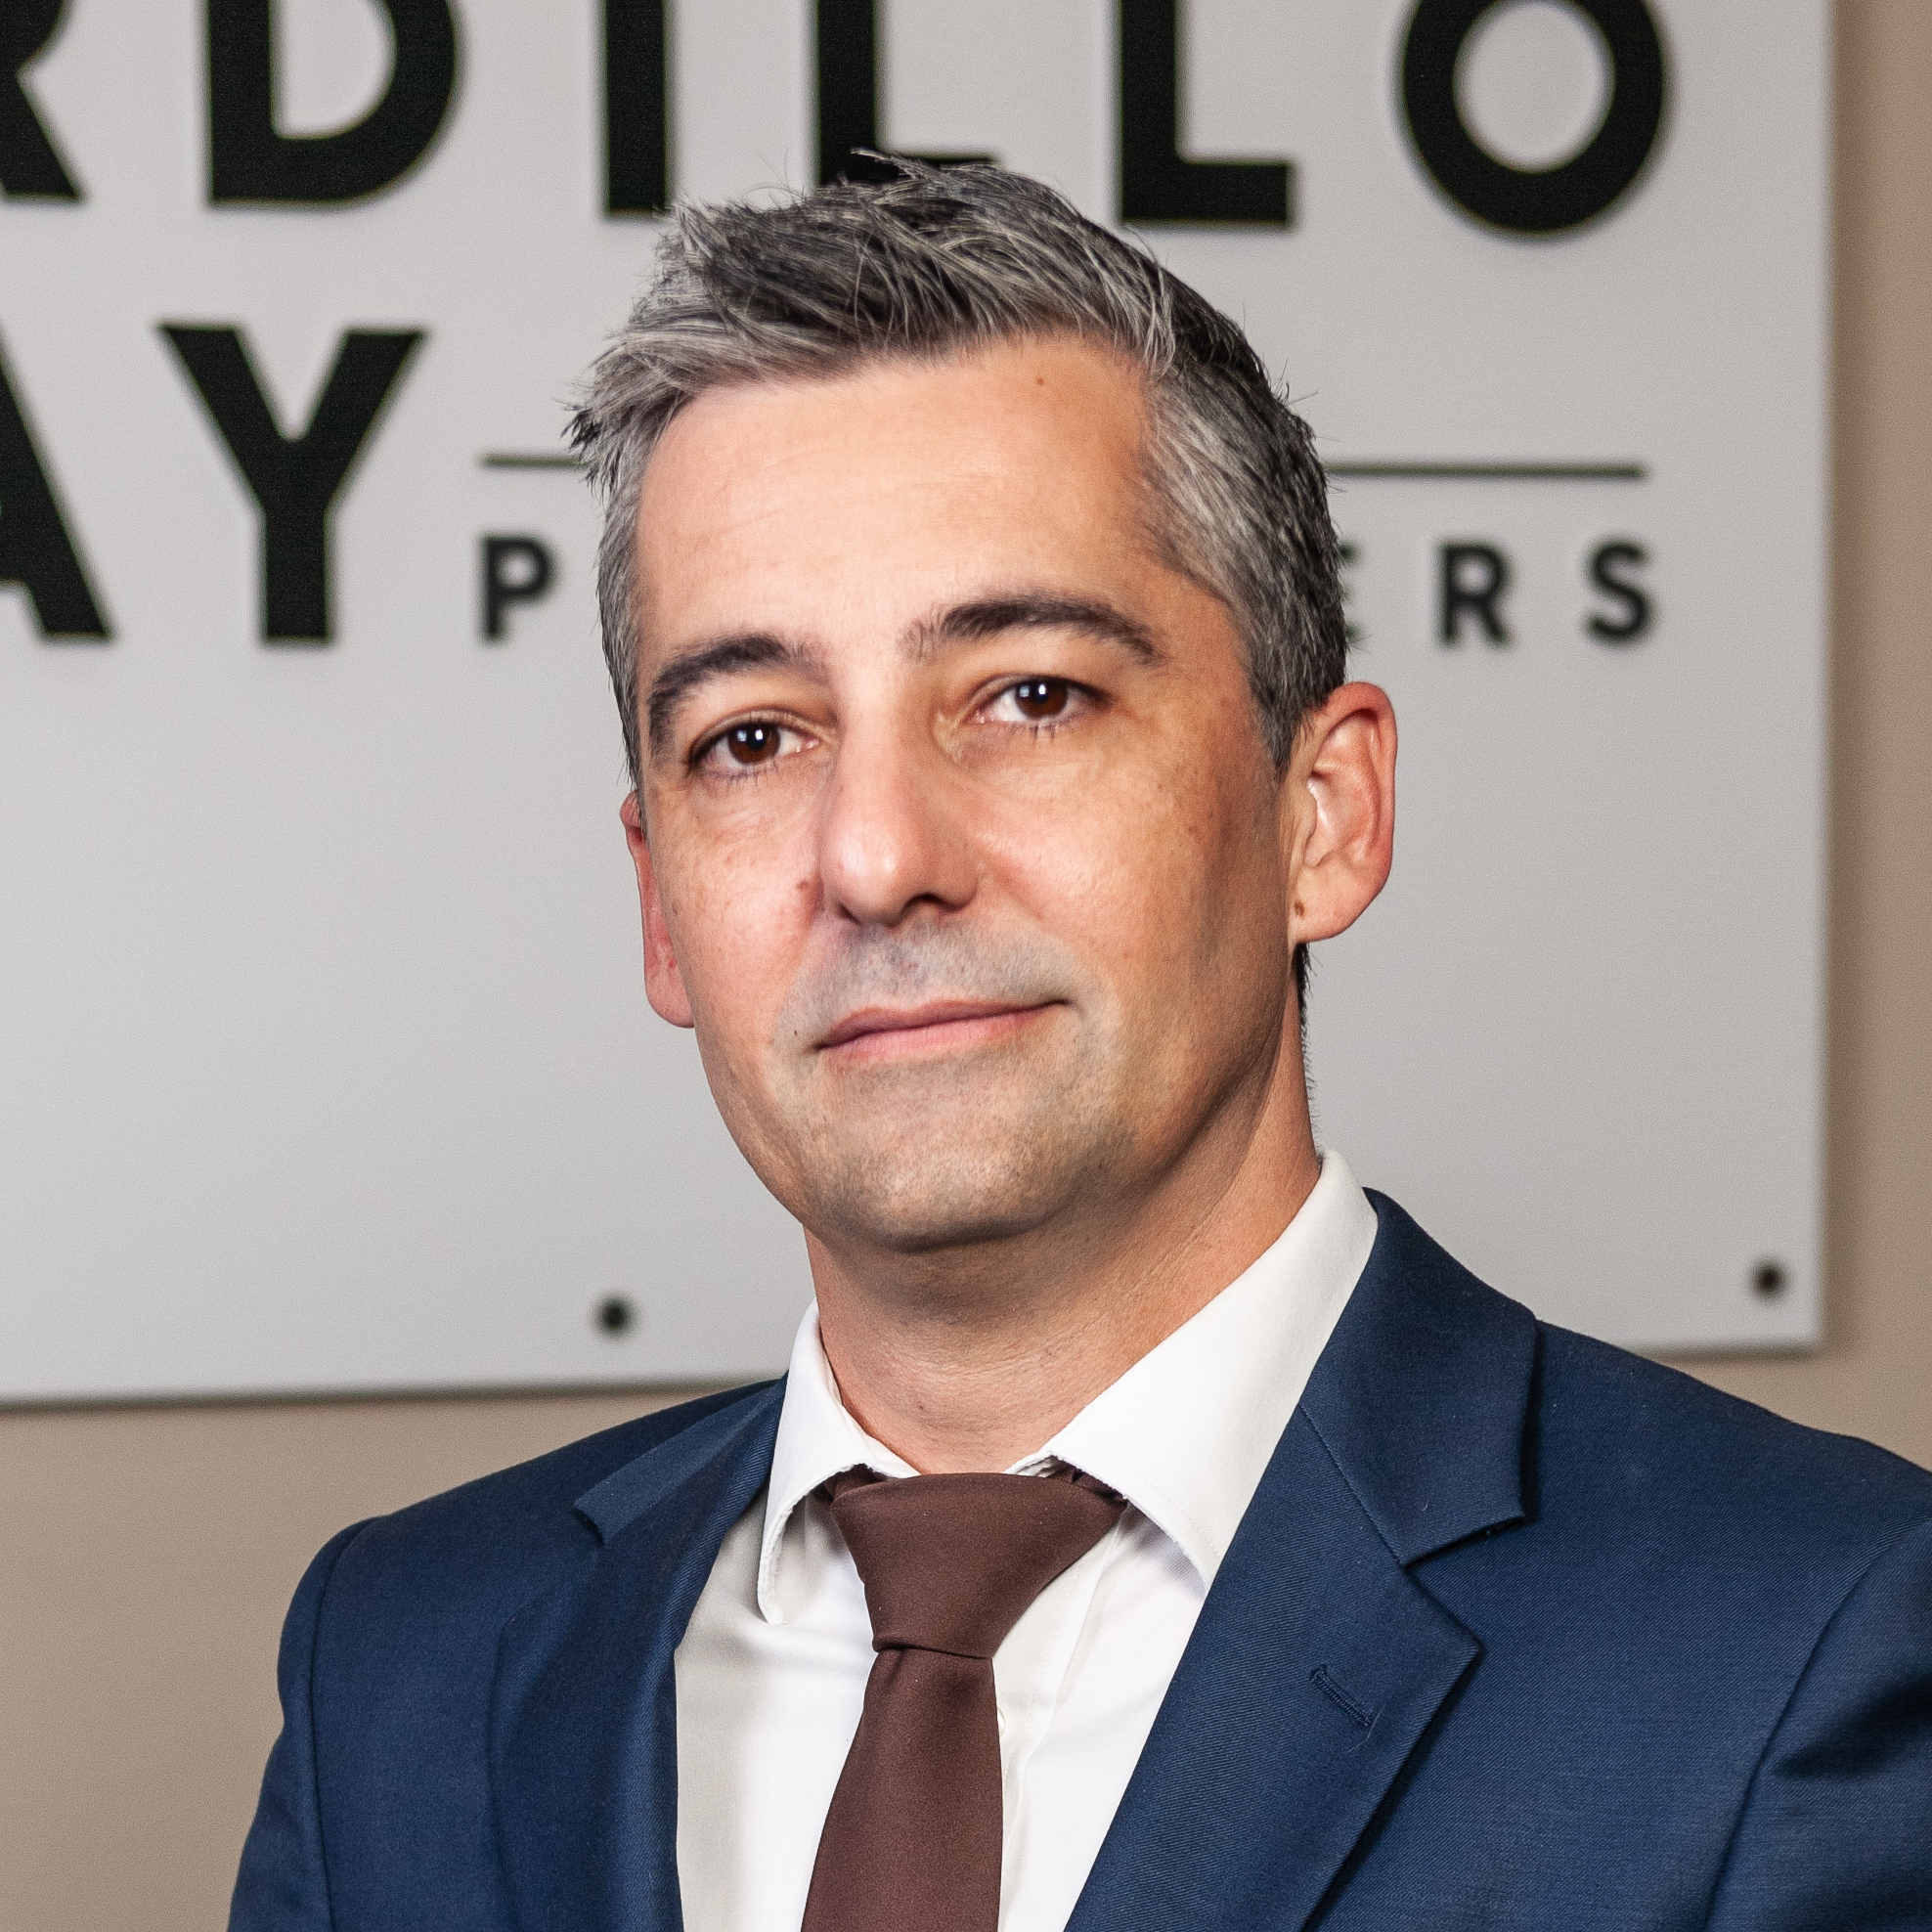 Specialist Legal Representation, About Us, Cardillo Gray Partners